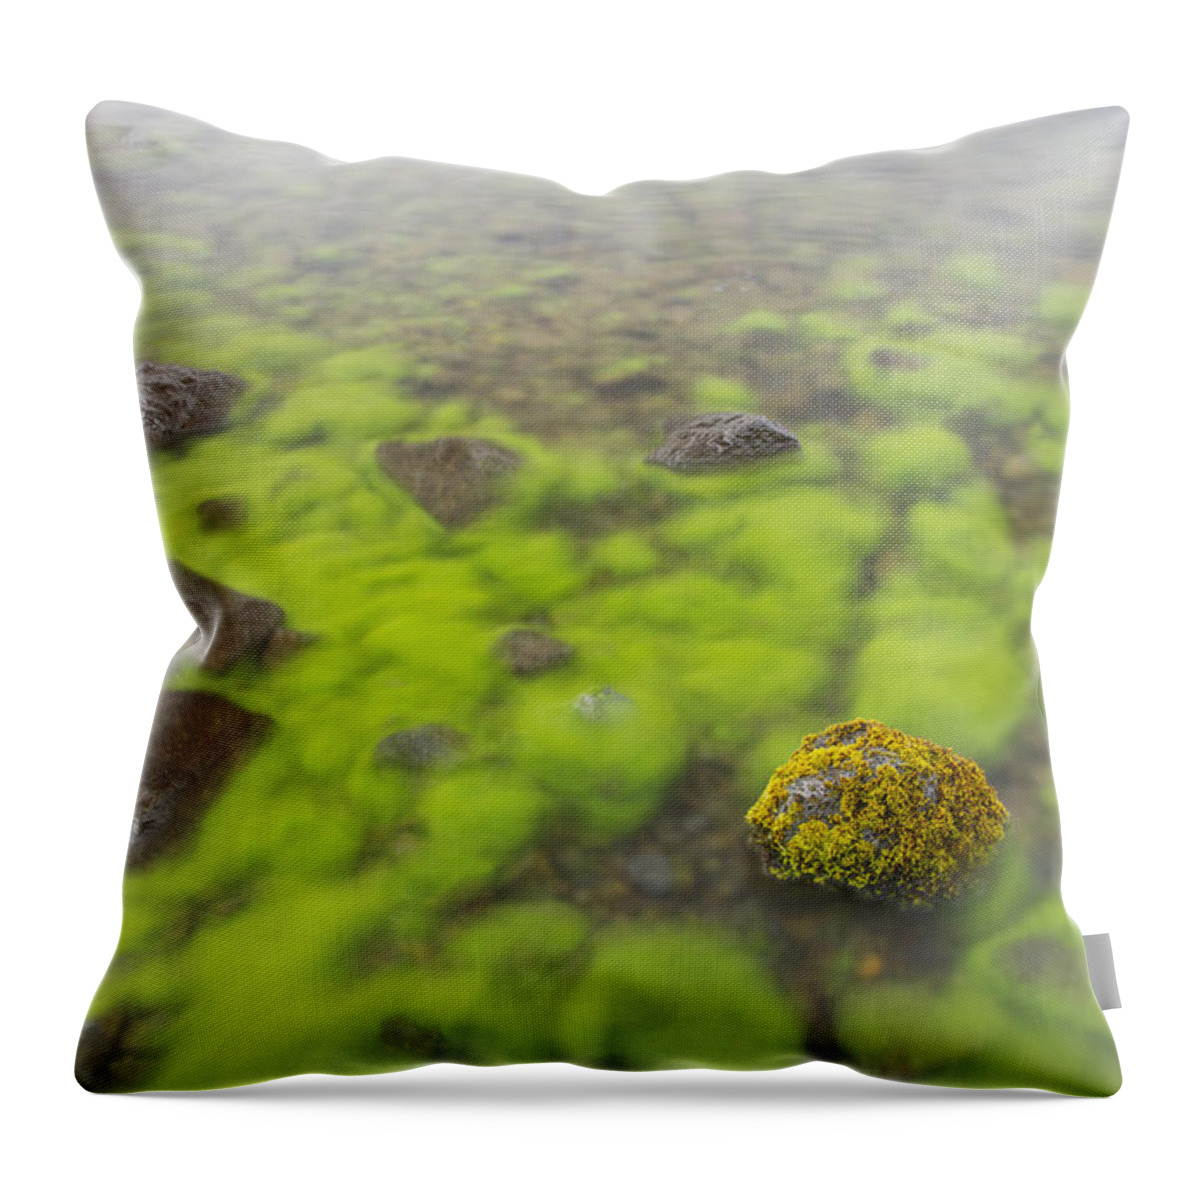 Flpa Throw Pillow featuring the photograph Mossy Stone In Lake Thingvallavatn by Bill Coster